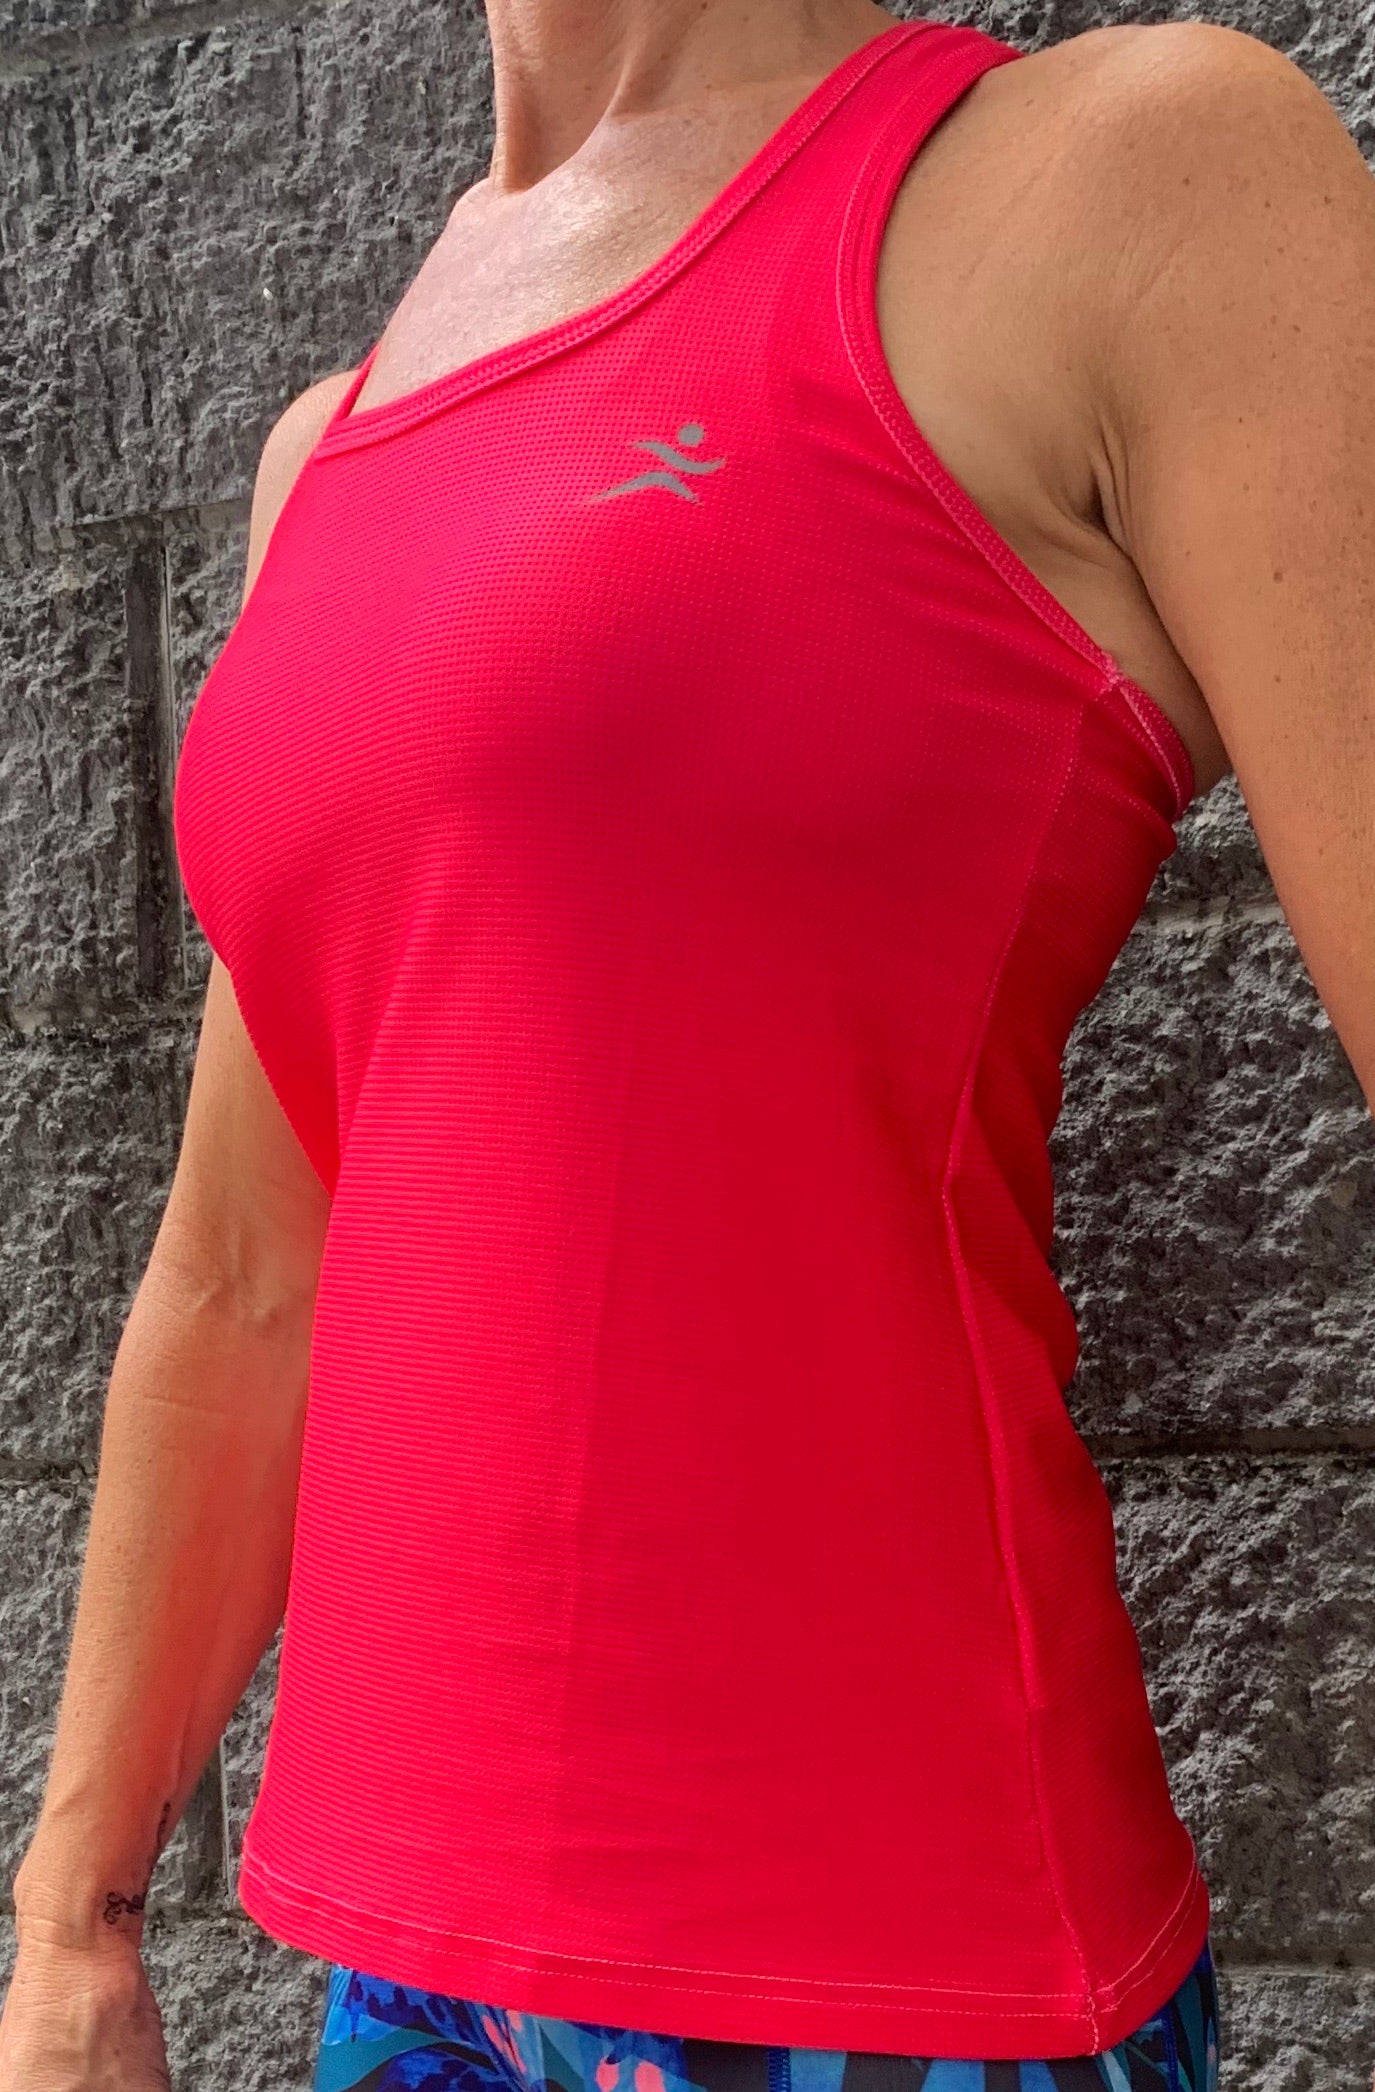 Gmaxx BREEZE 'Hot Pink' Strappy Back Sports Top